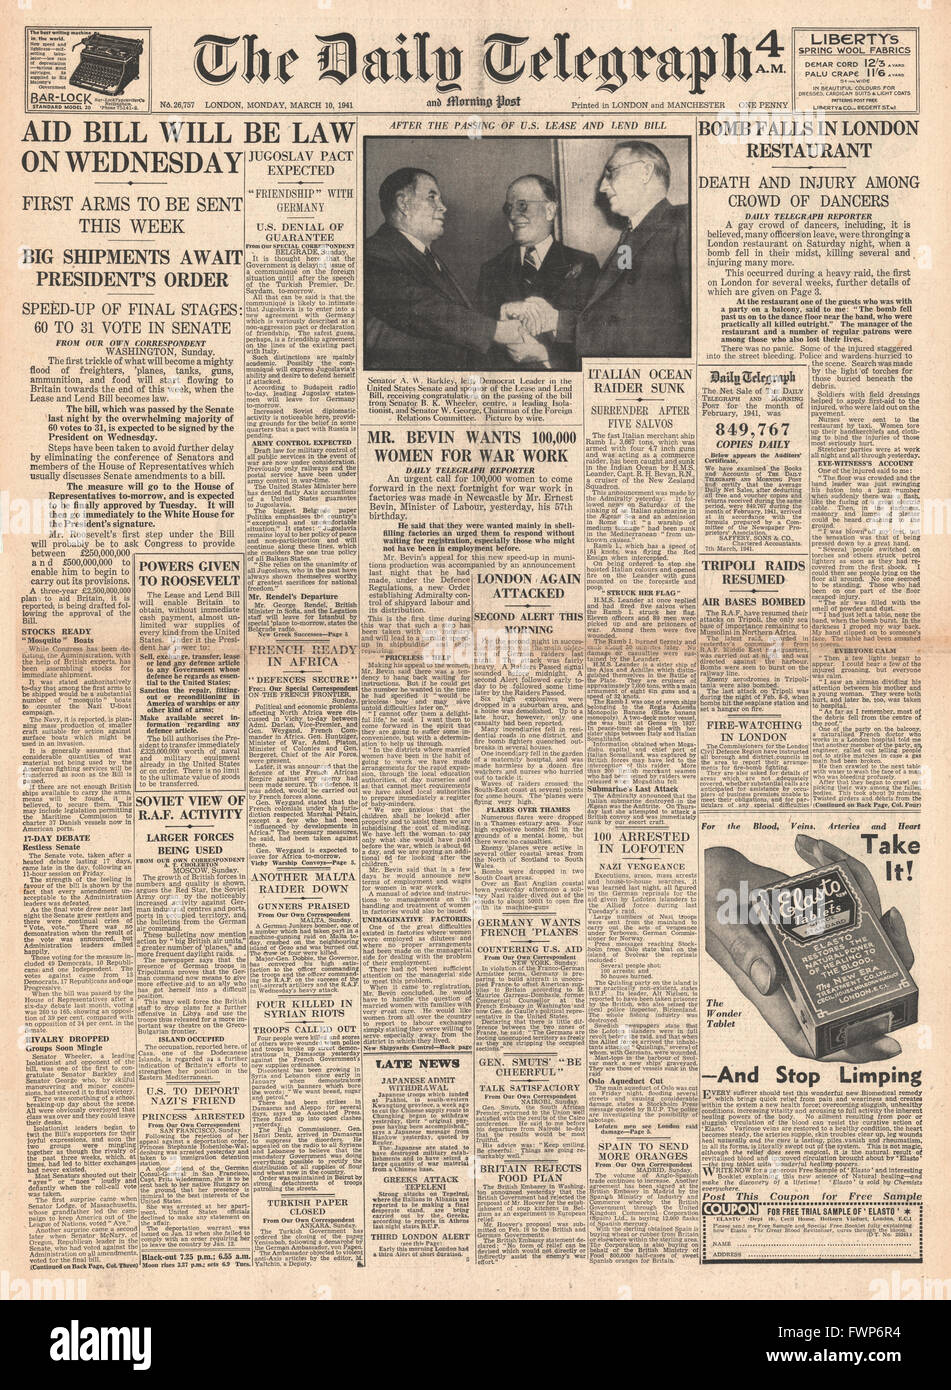 1941 front page Daily Telegraph U.S. Aid Bill passed by Senate, Ernest Bevin calls for more women in war work and Café de Paris bombed in London Stock Photo